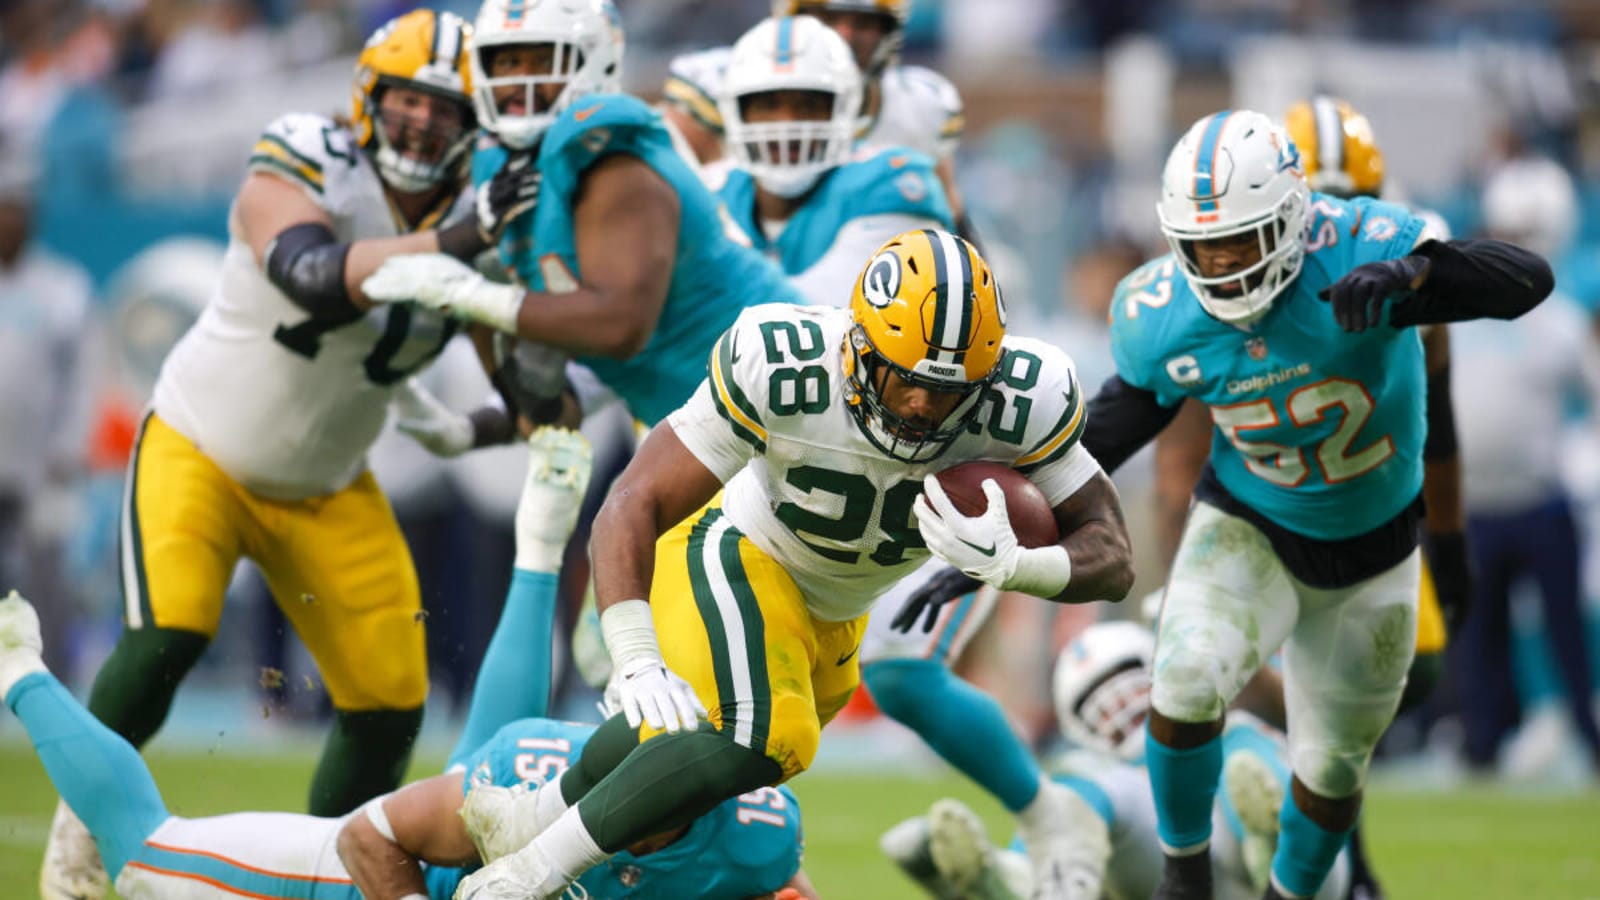 Miami Dolphins handed a brutal final stretch of games by the NFL by the NFL once again